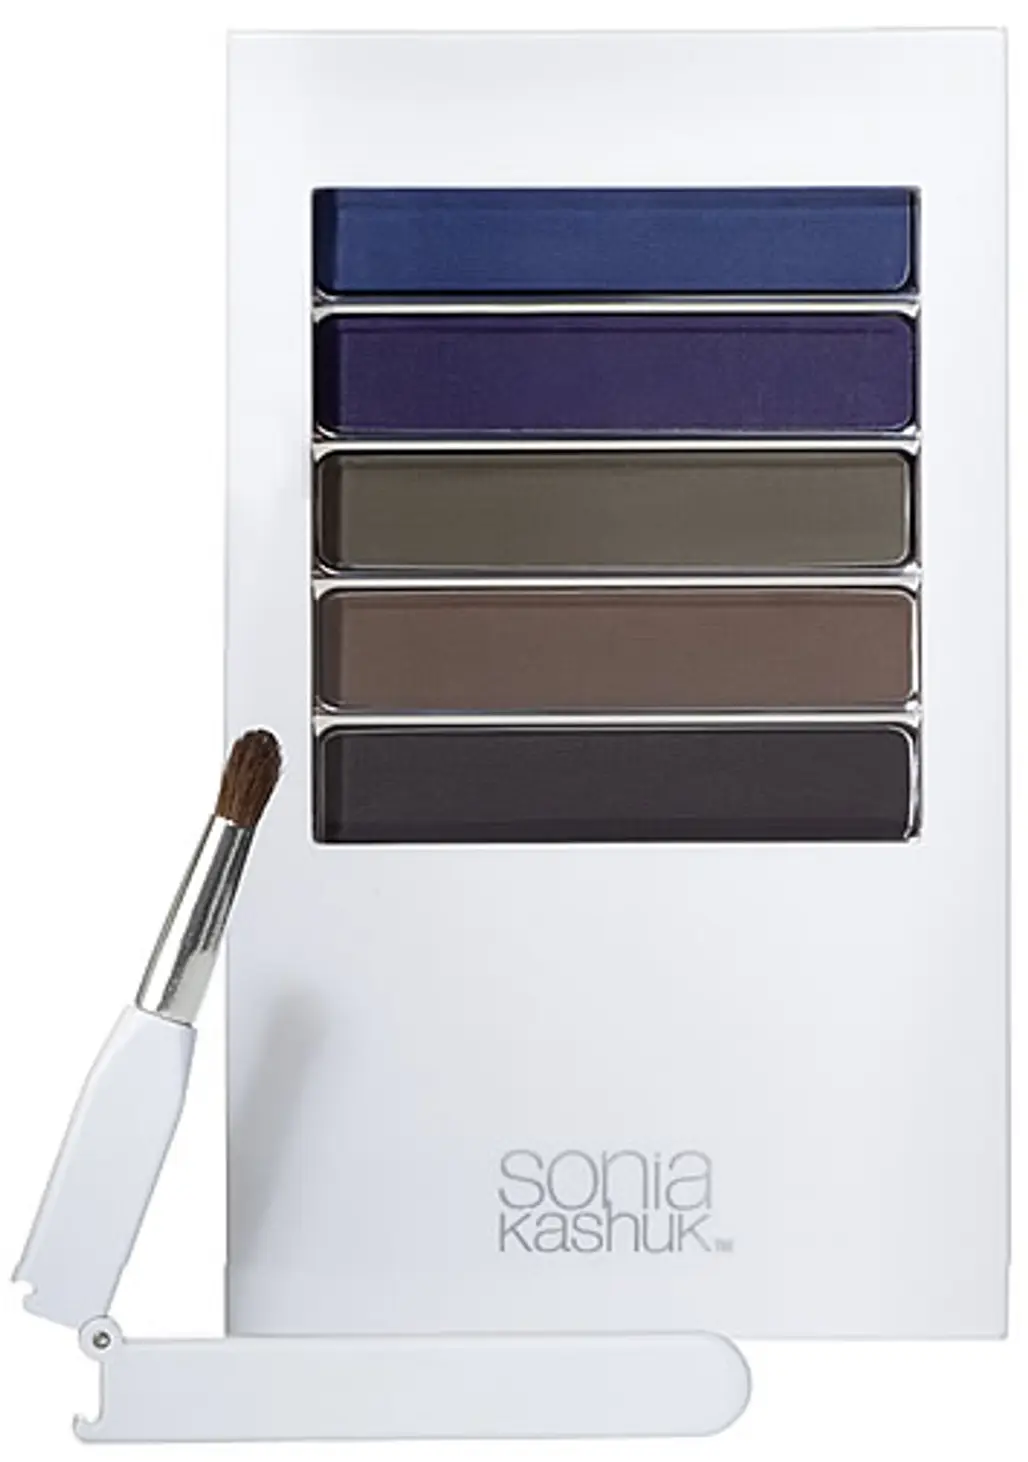 Sonia Kashuk Eyeliner Palette in Lay It One the Line